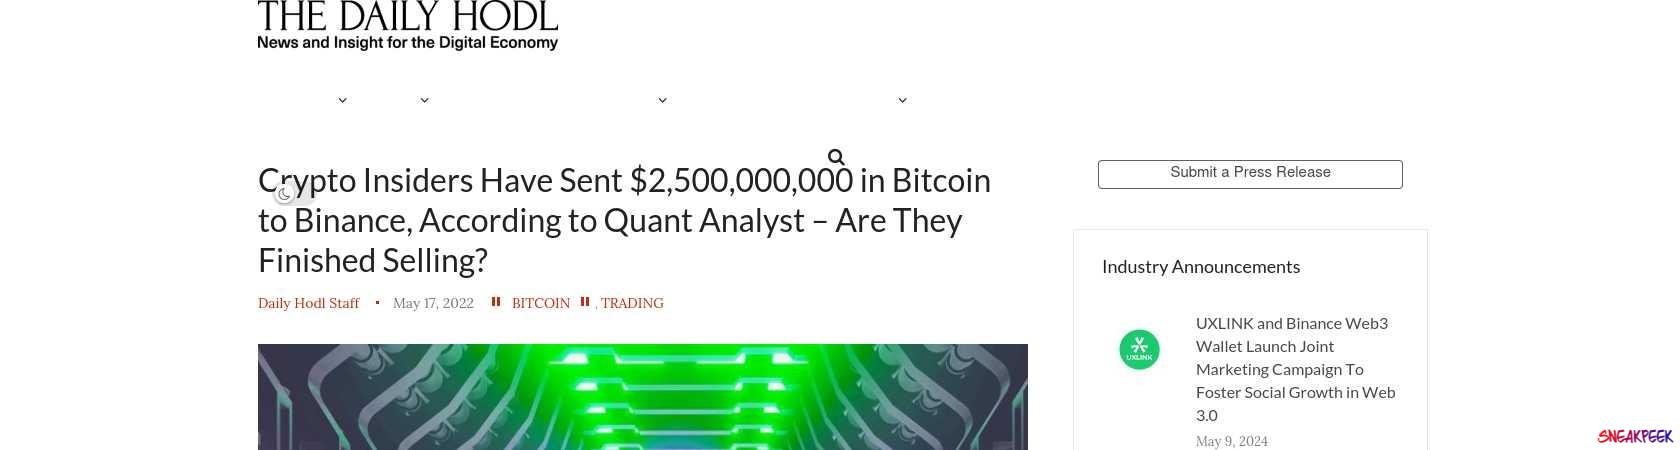 Read the full Article:  ⭲ Crypto Insiders Have Sent $2,500,000,000 in Bitcoin to Binance, According to Quant Analyst – Are They Finished Selling?